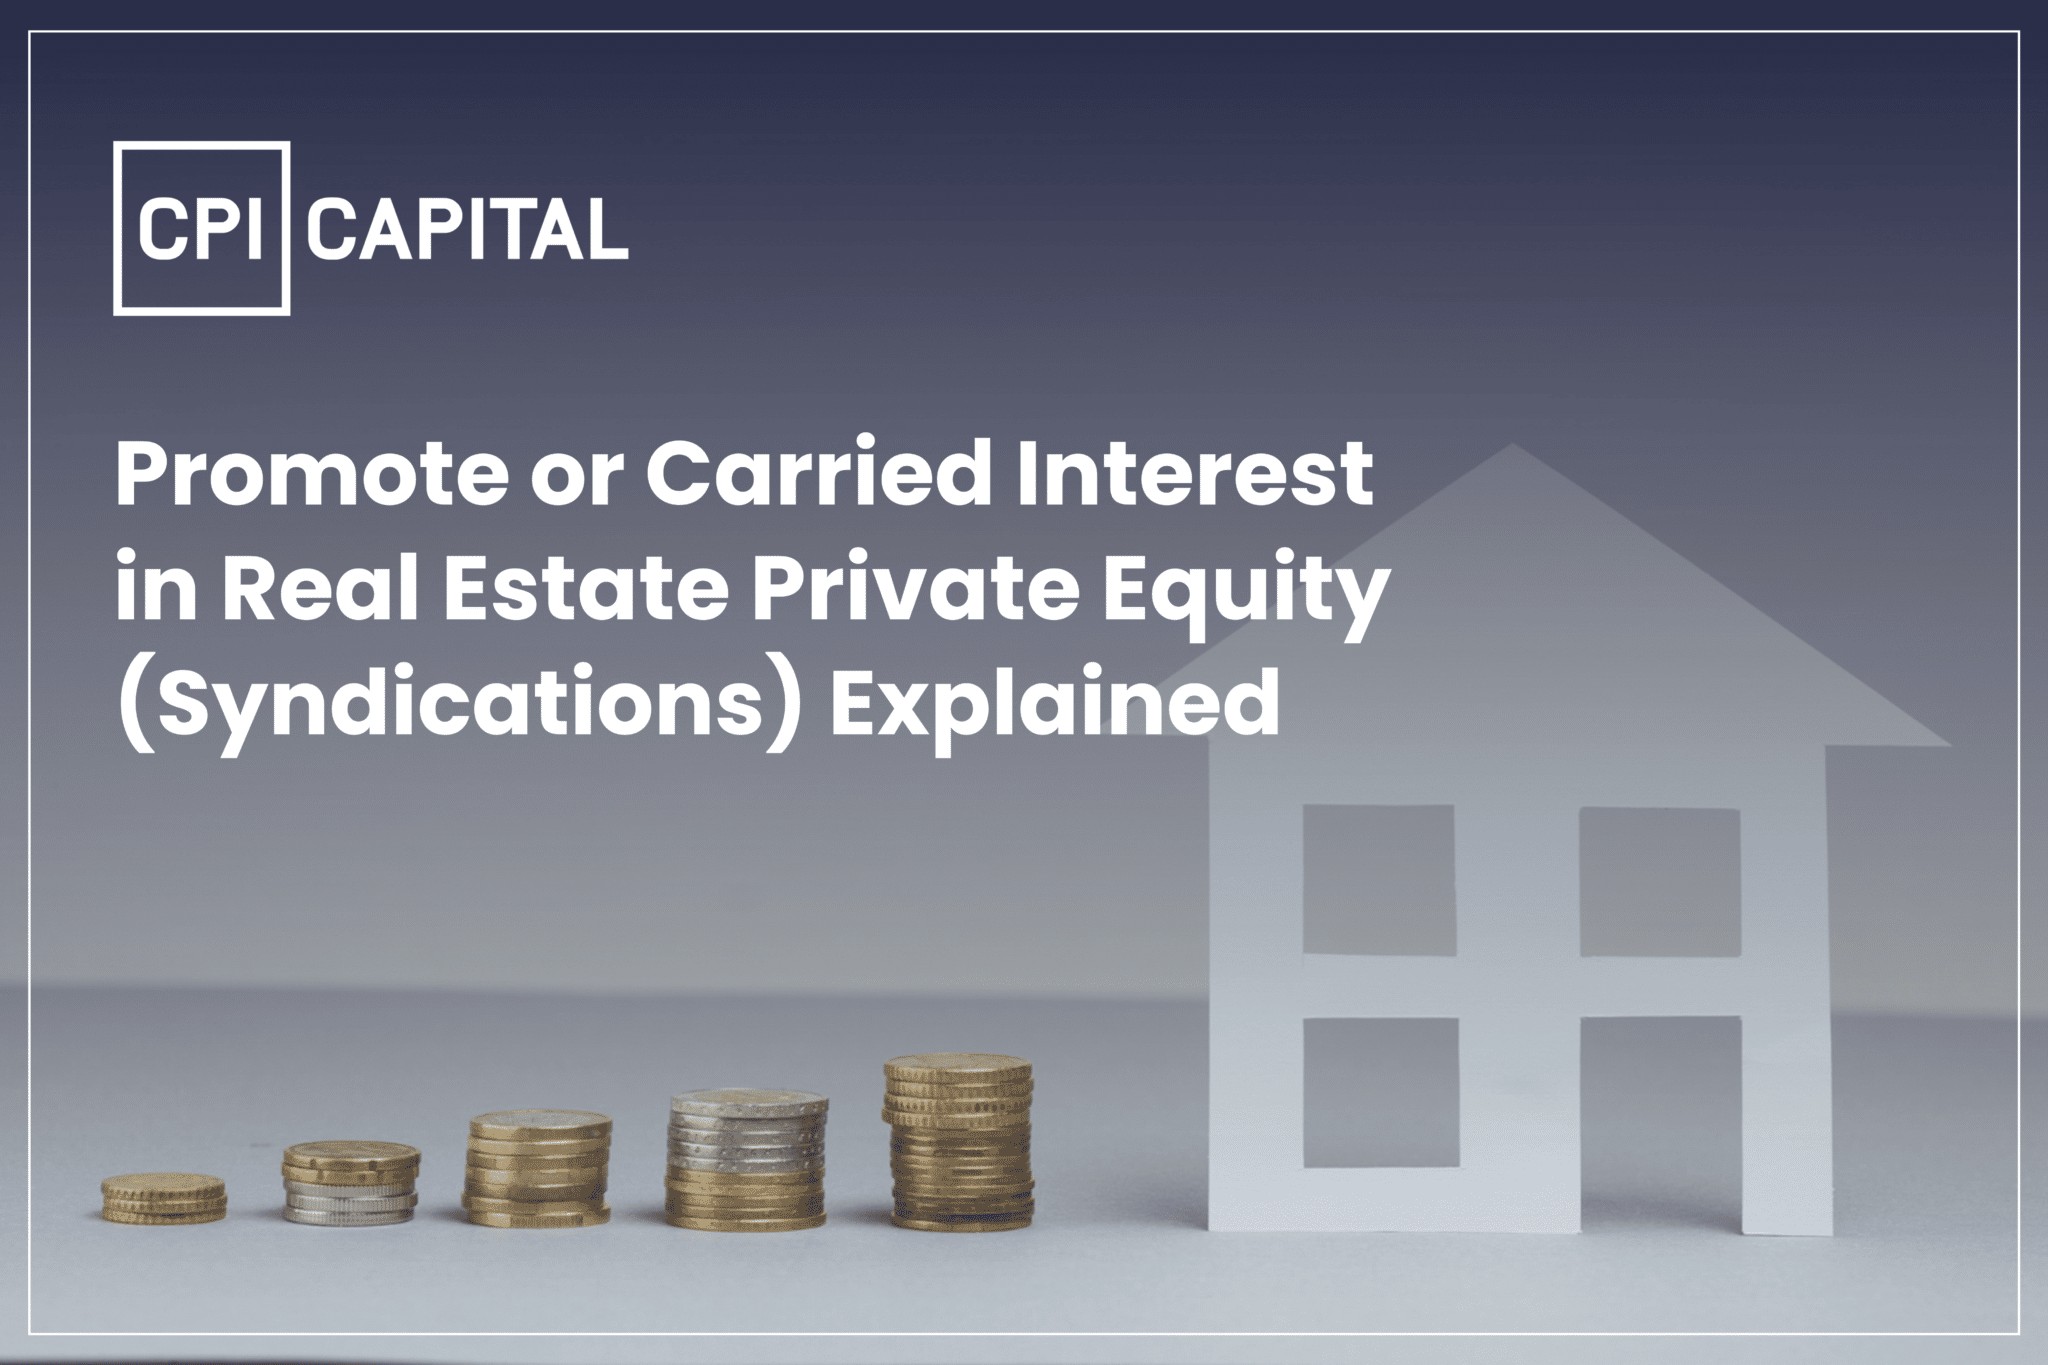 Promote Or Carried Interest In Real Estate Private Equity (syndications) Explained